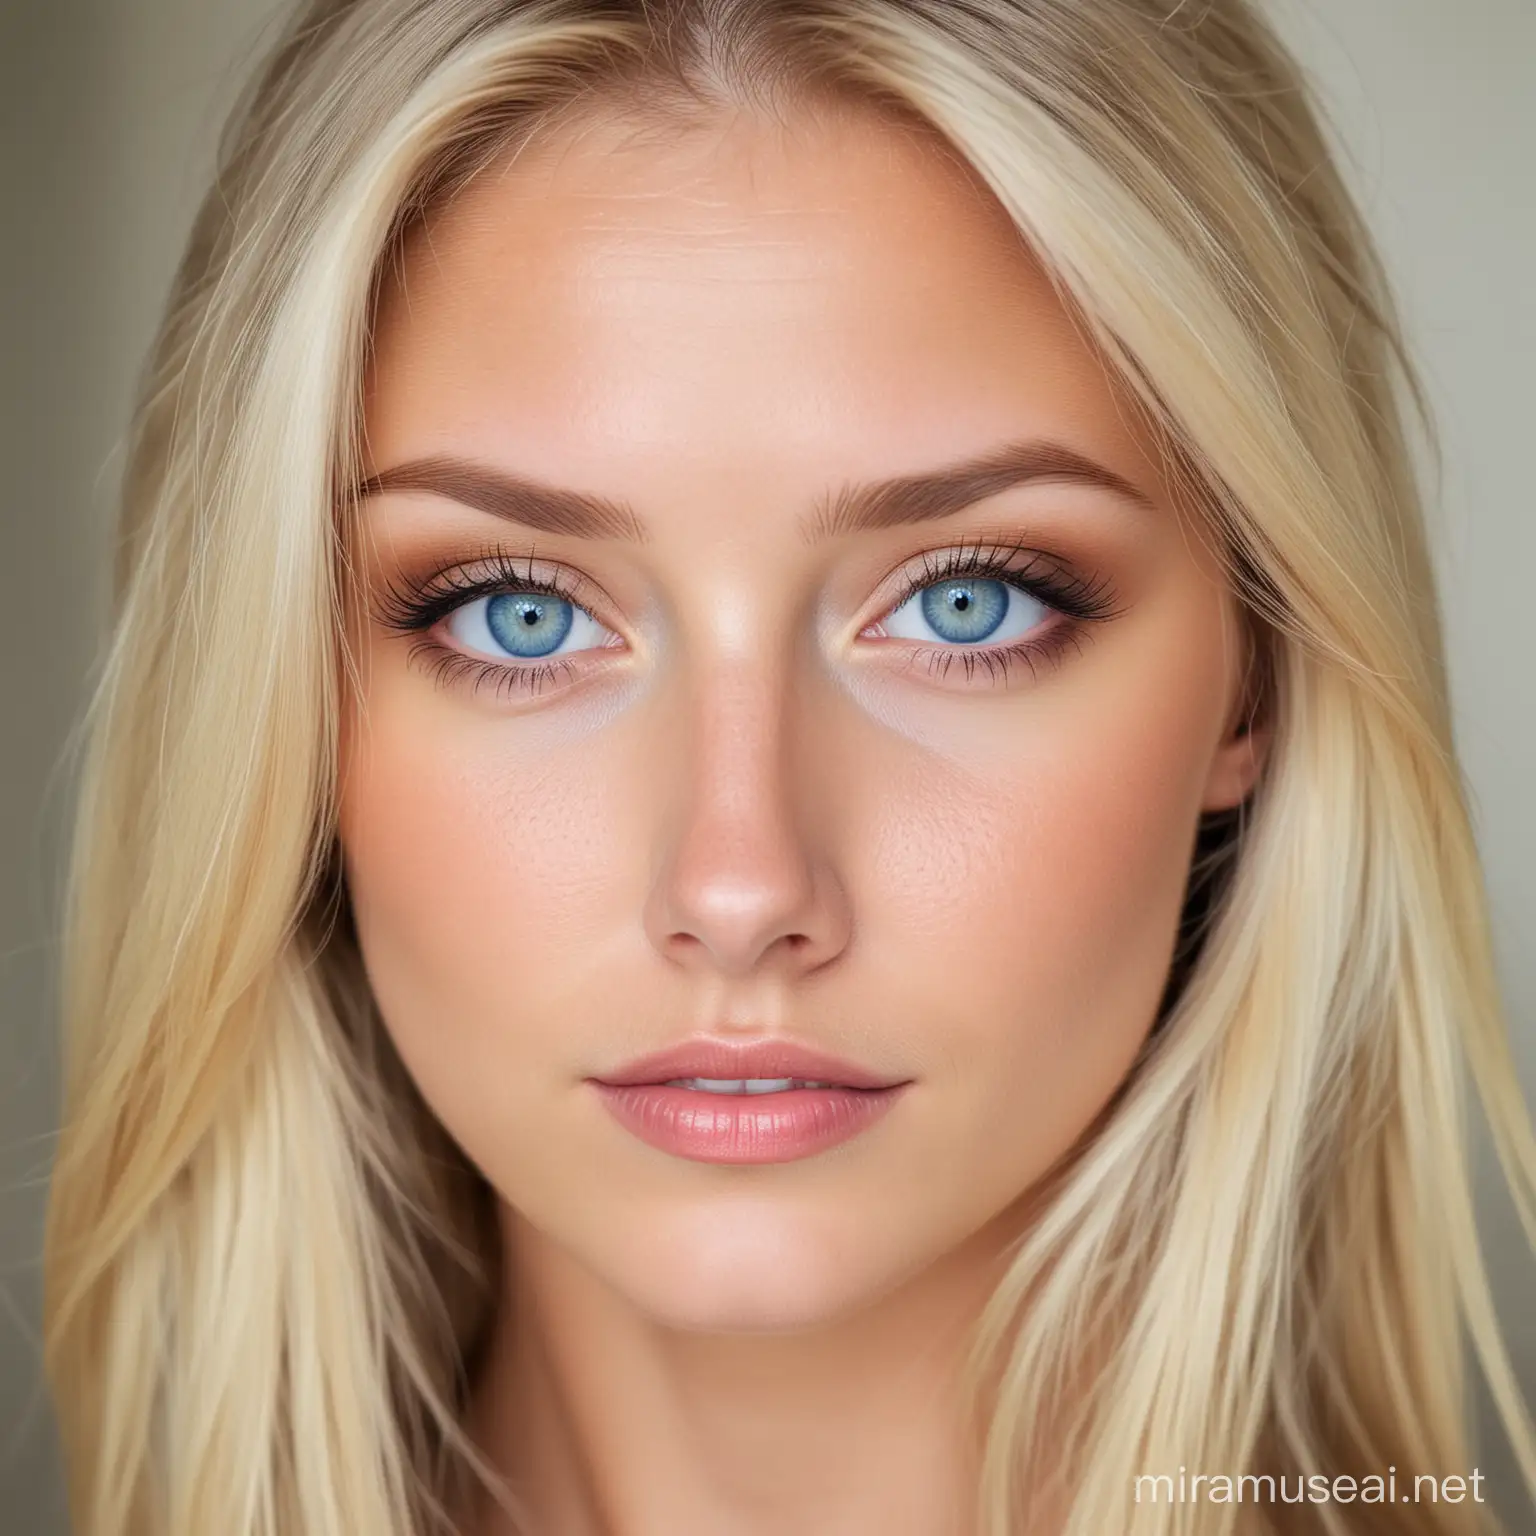 Stunning Young Blonde Woman with Mesmerizing Blue Eyes